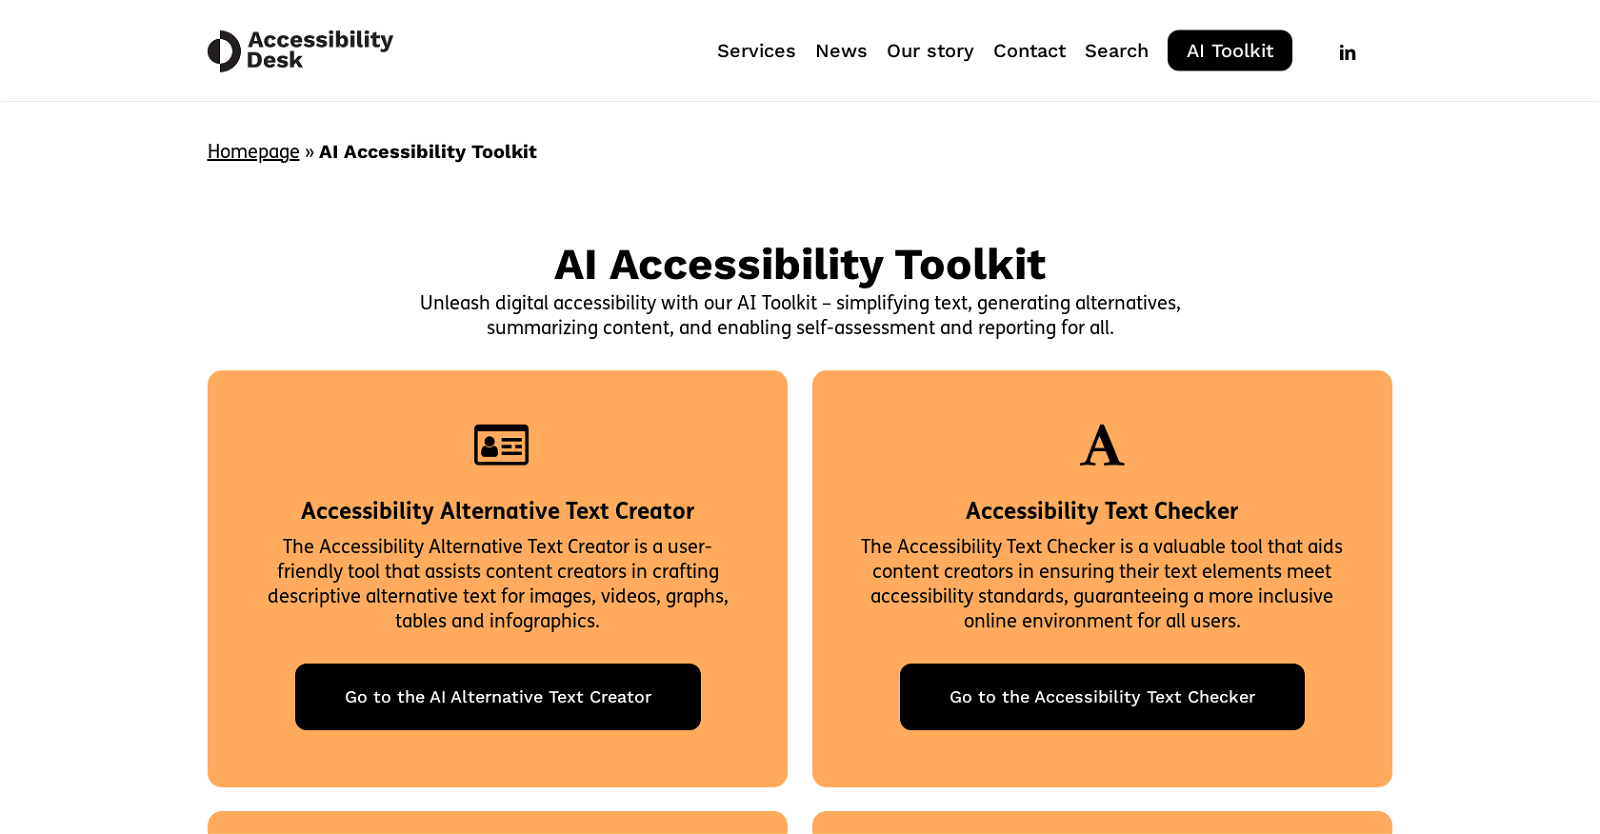 Accessibility Desk website